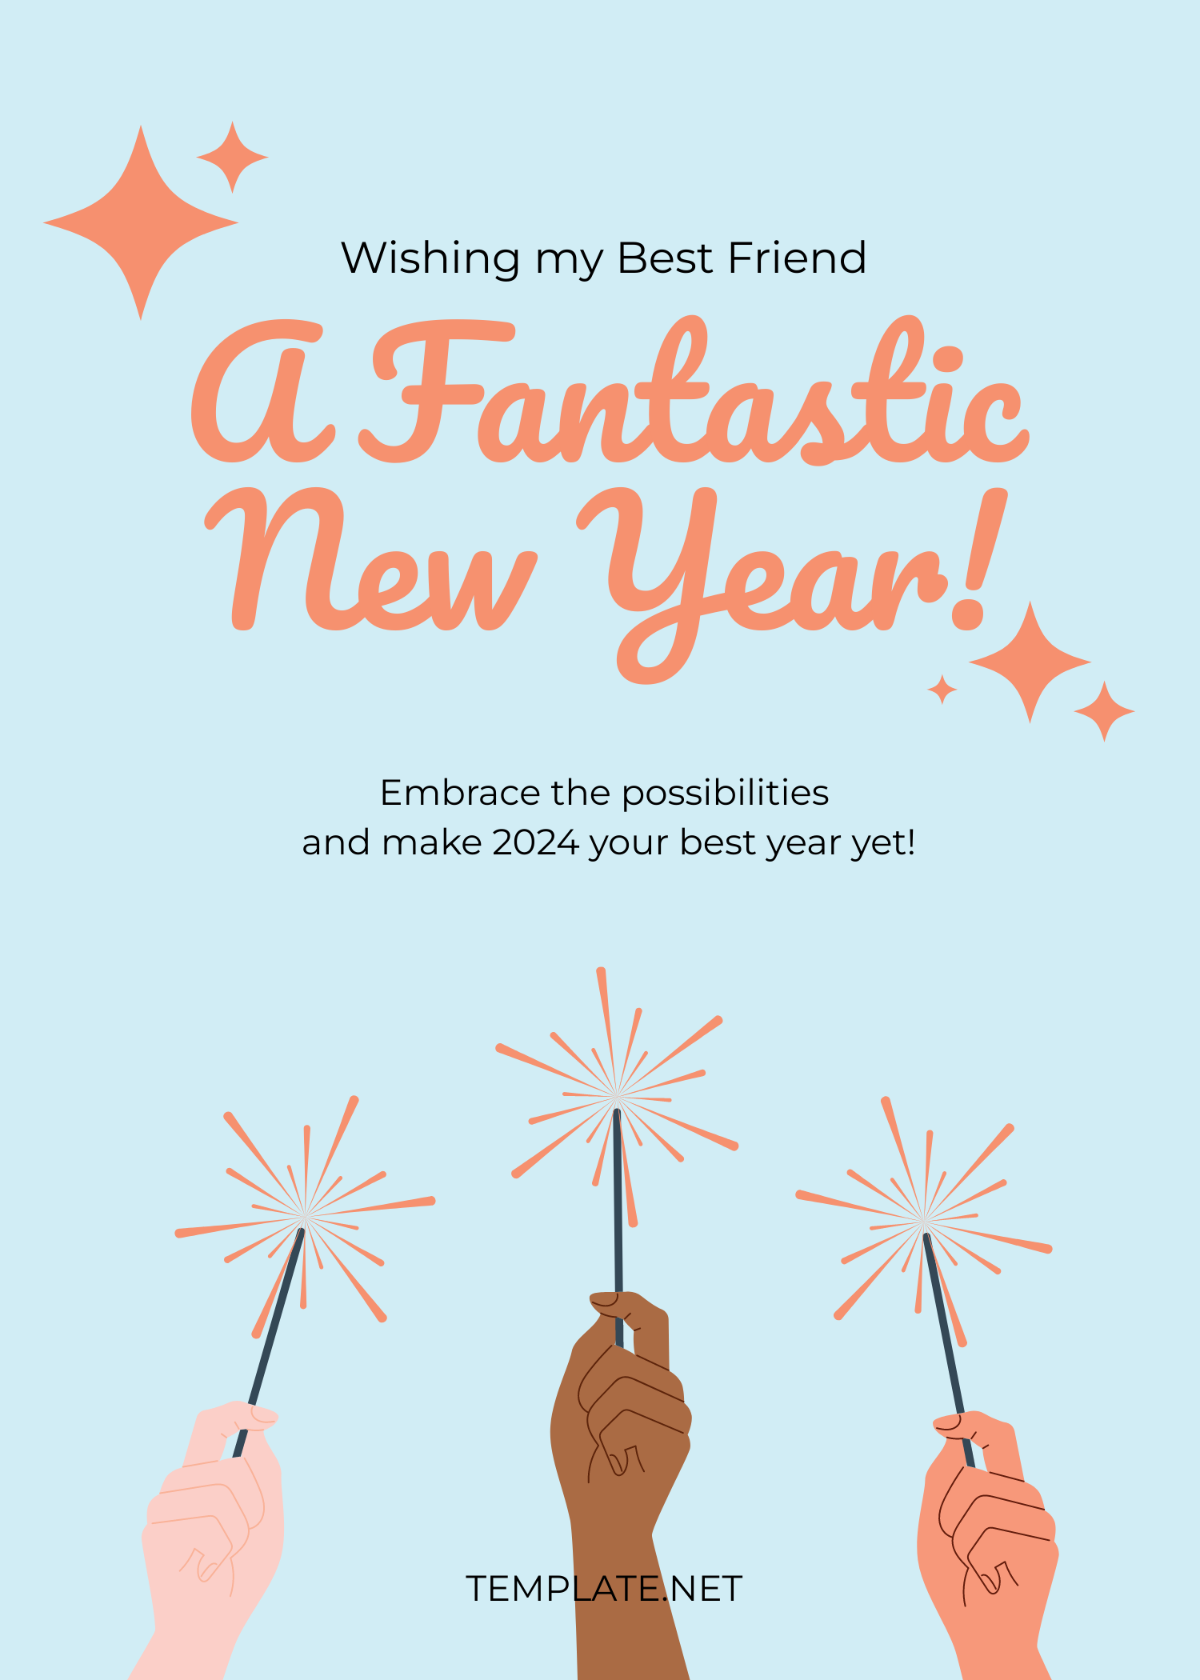 New Year Greeting For Friends